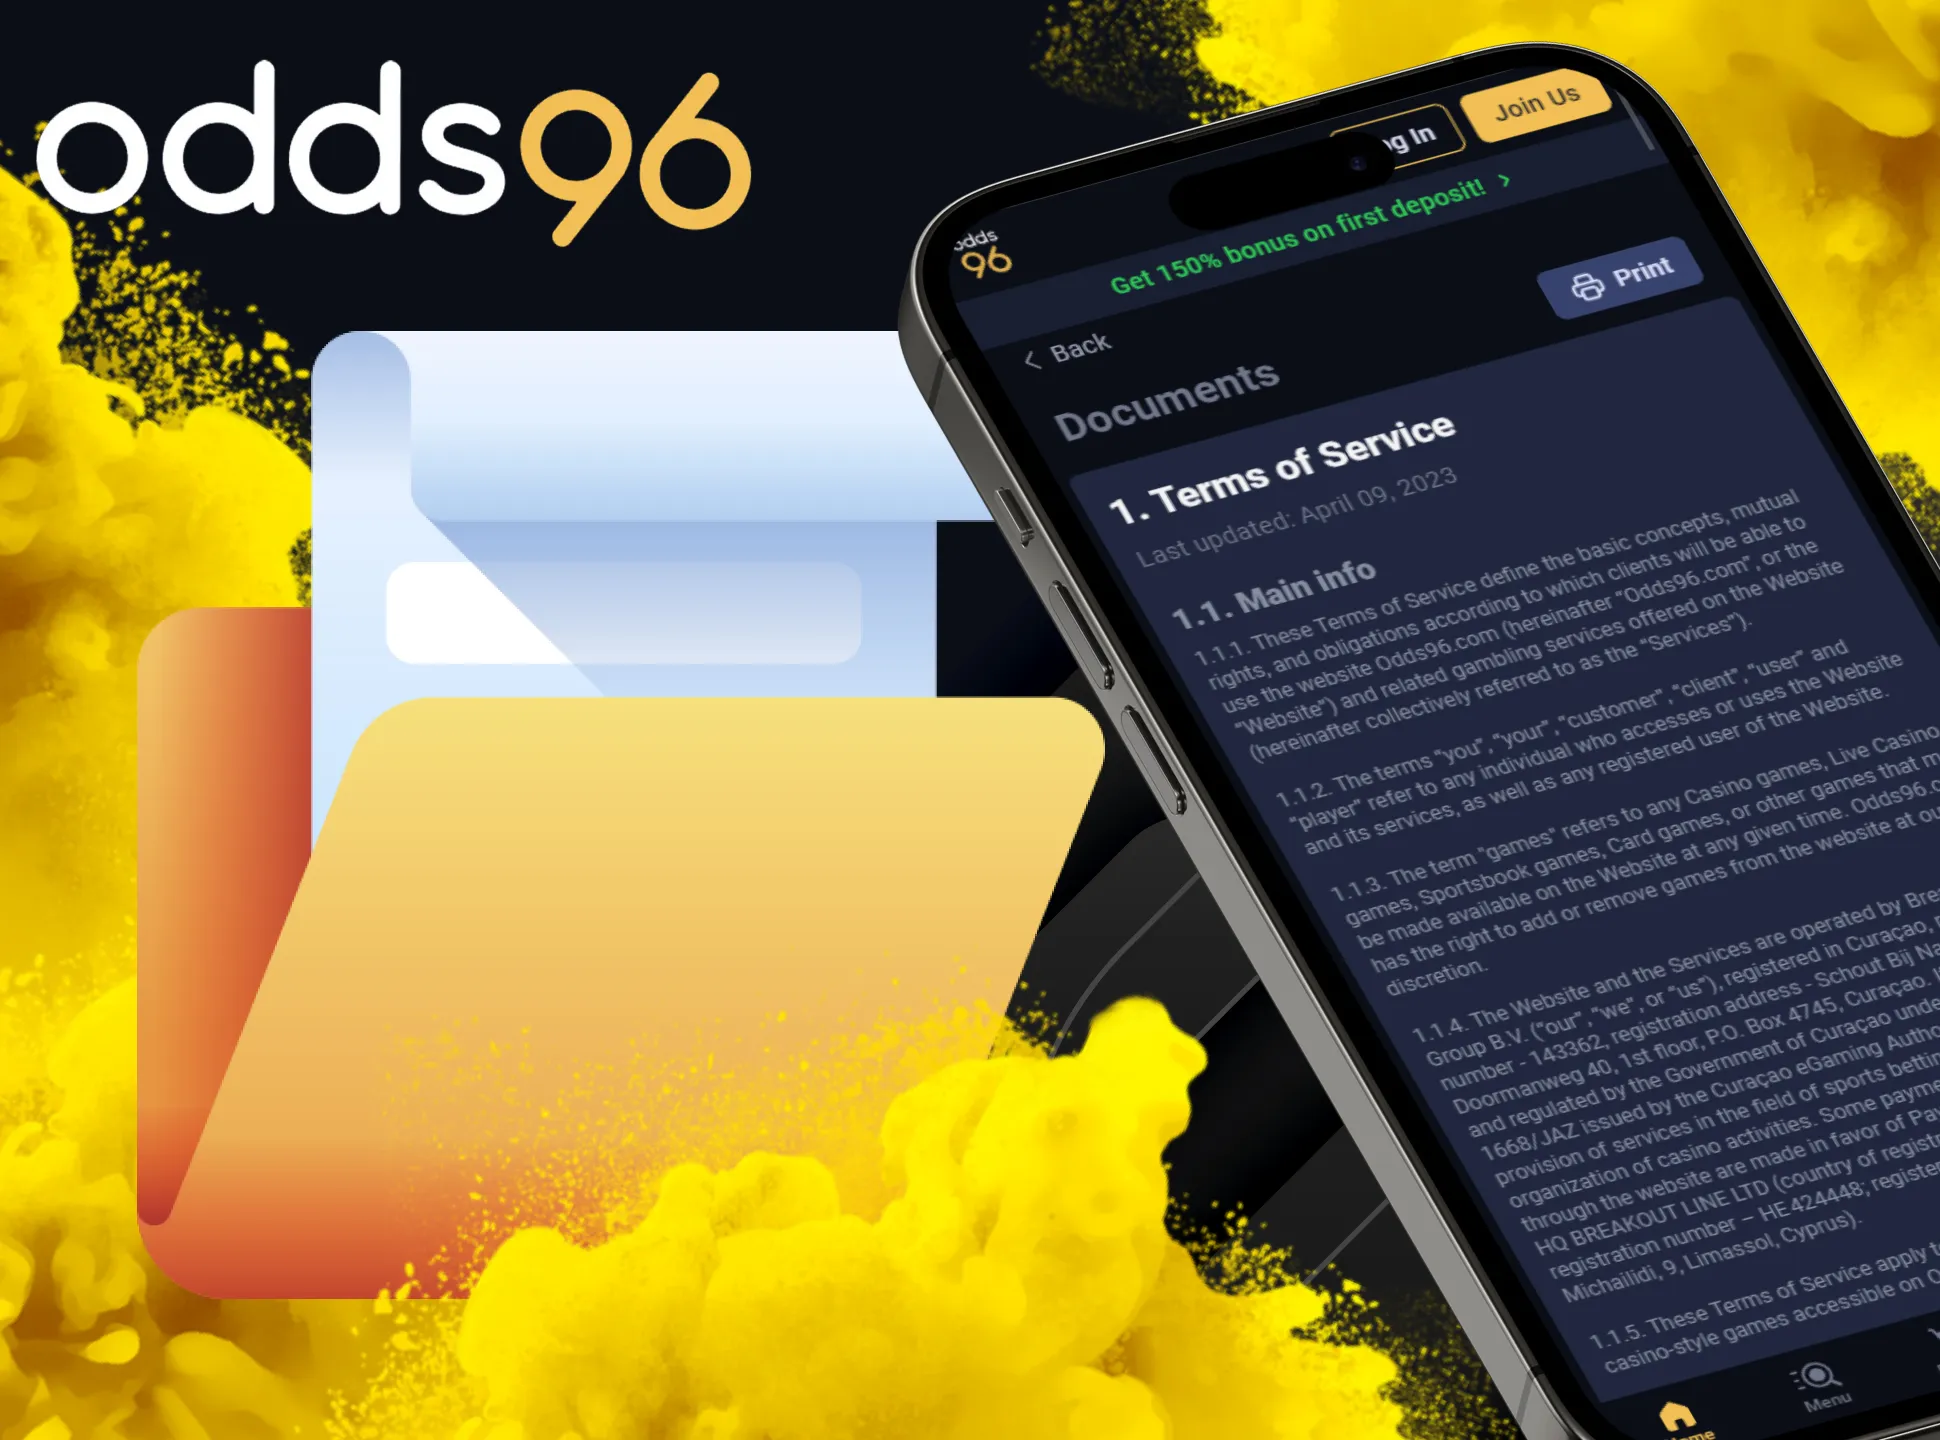 Read Odds96 terms and conditions before getting bonuses.